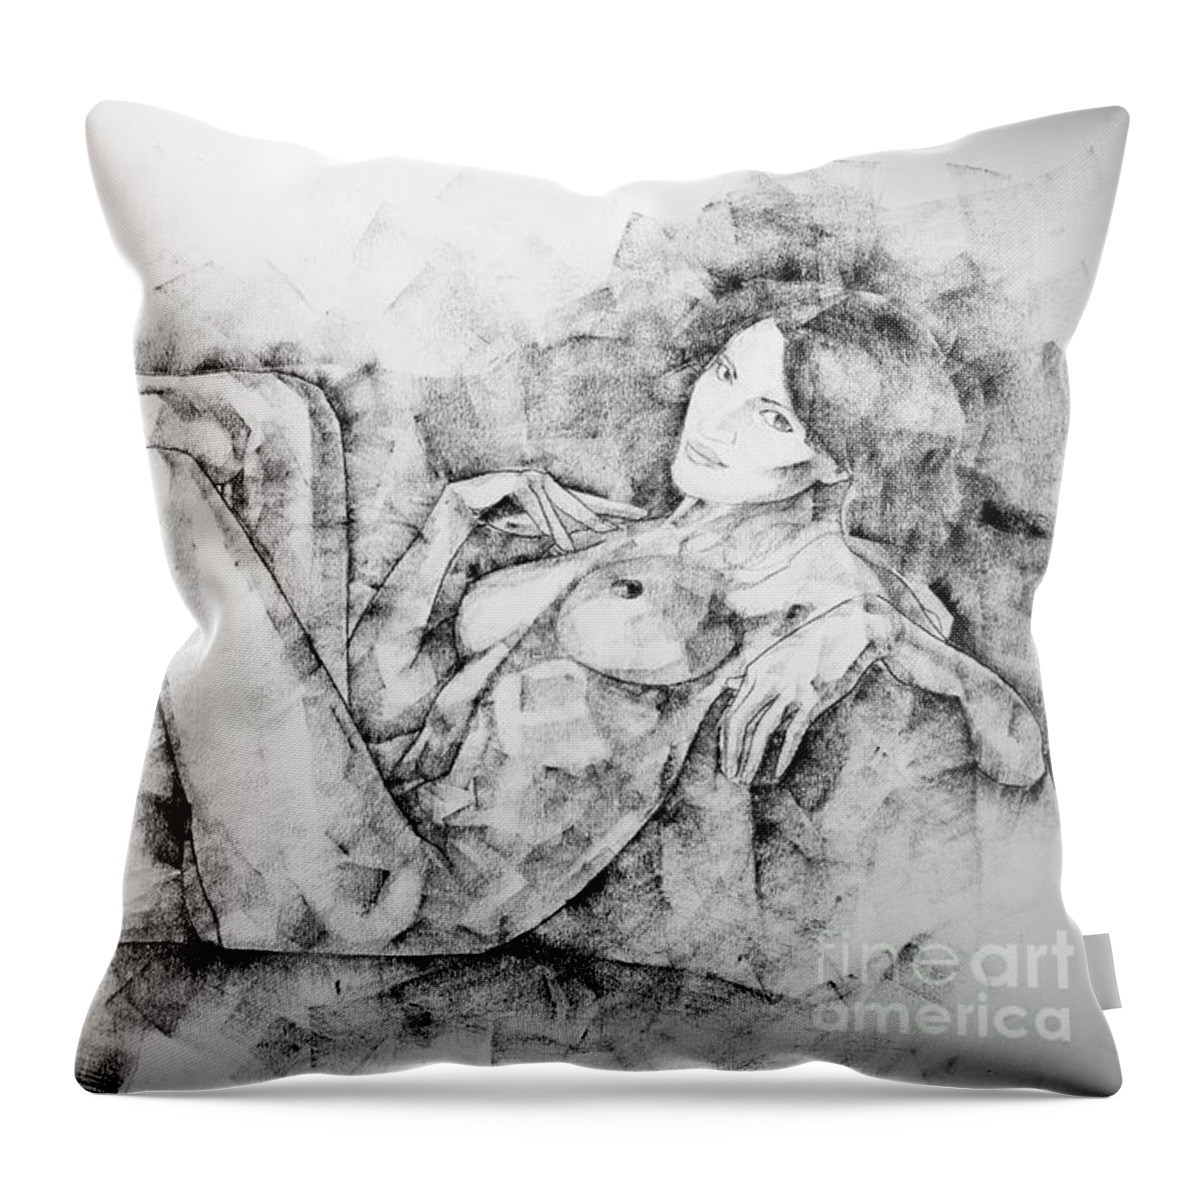 Art Throw Pillow featuring the drawing SketchBook Page 46 Drawing Woman Classical Sitting Pose by Dimitar Hristov